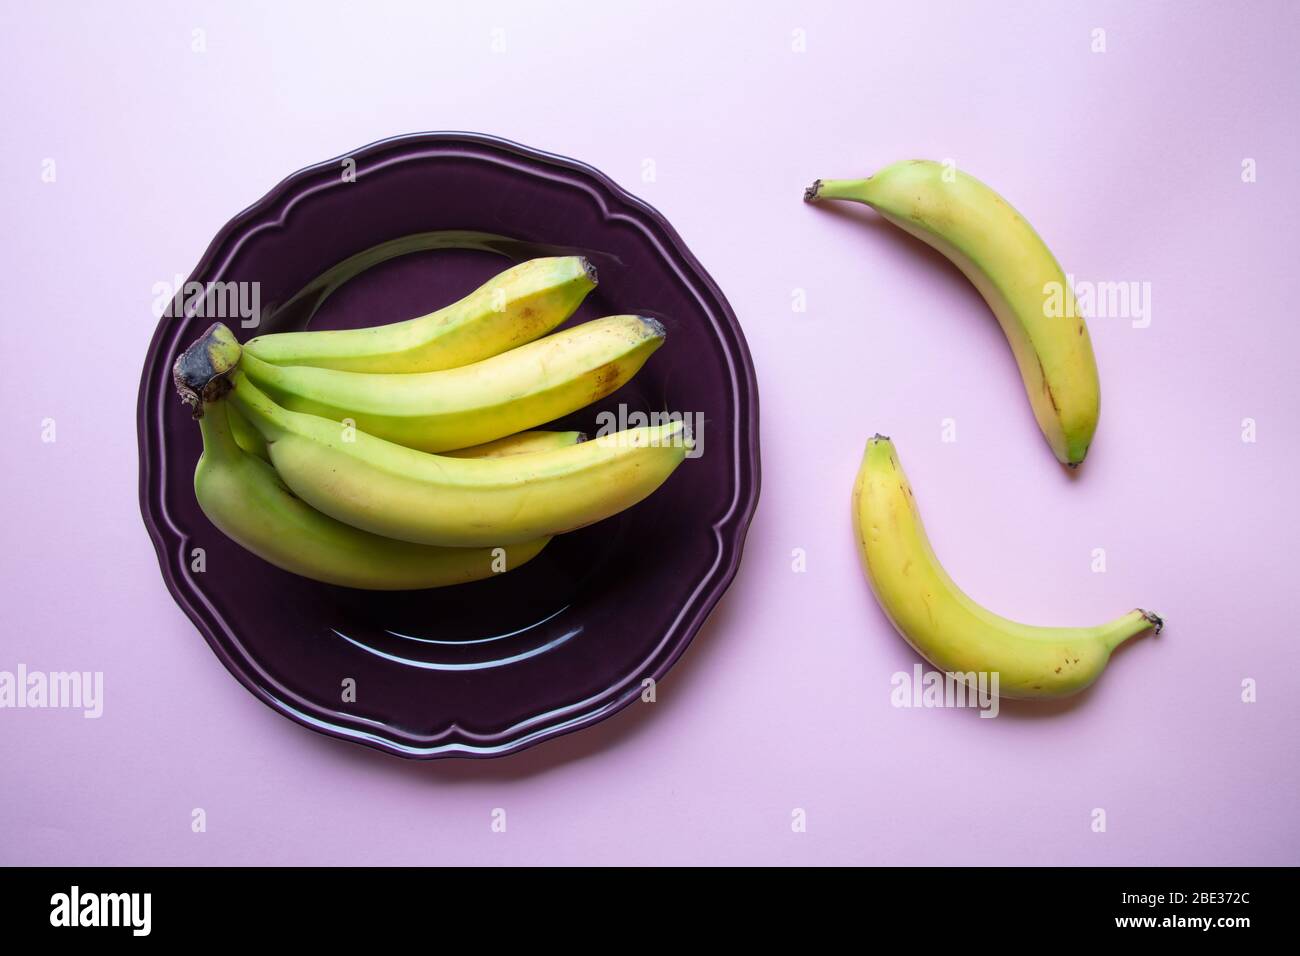 a stylish pastel coloured image of a bunch of bananas an a decorative purple plate with pink background, flat lay, top view Stock Photo